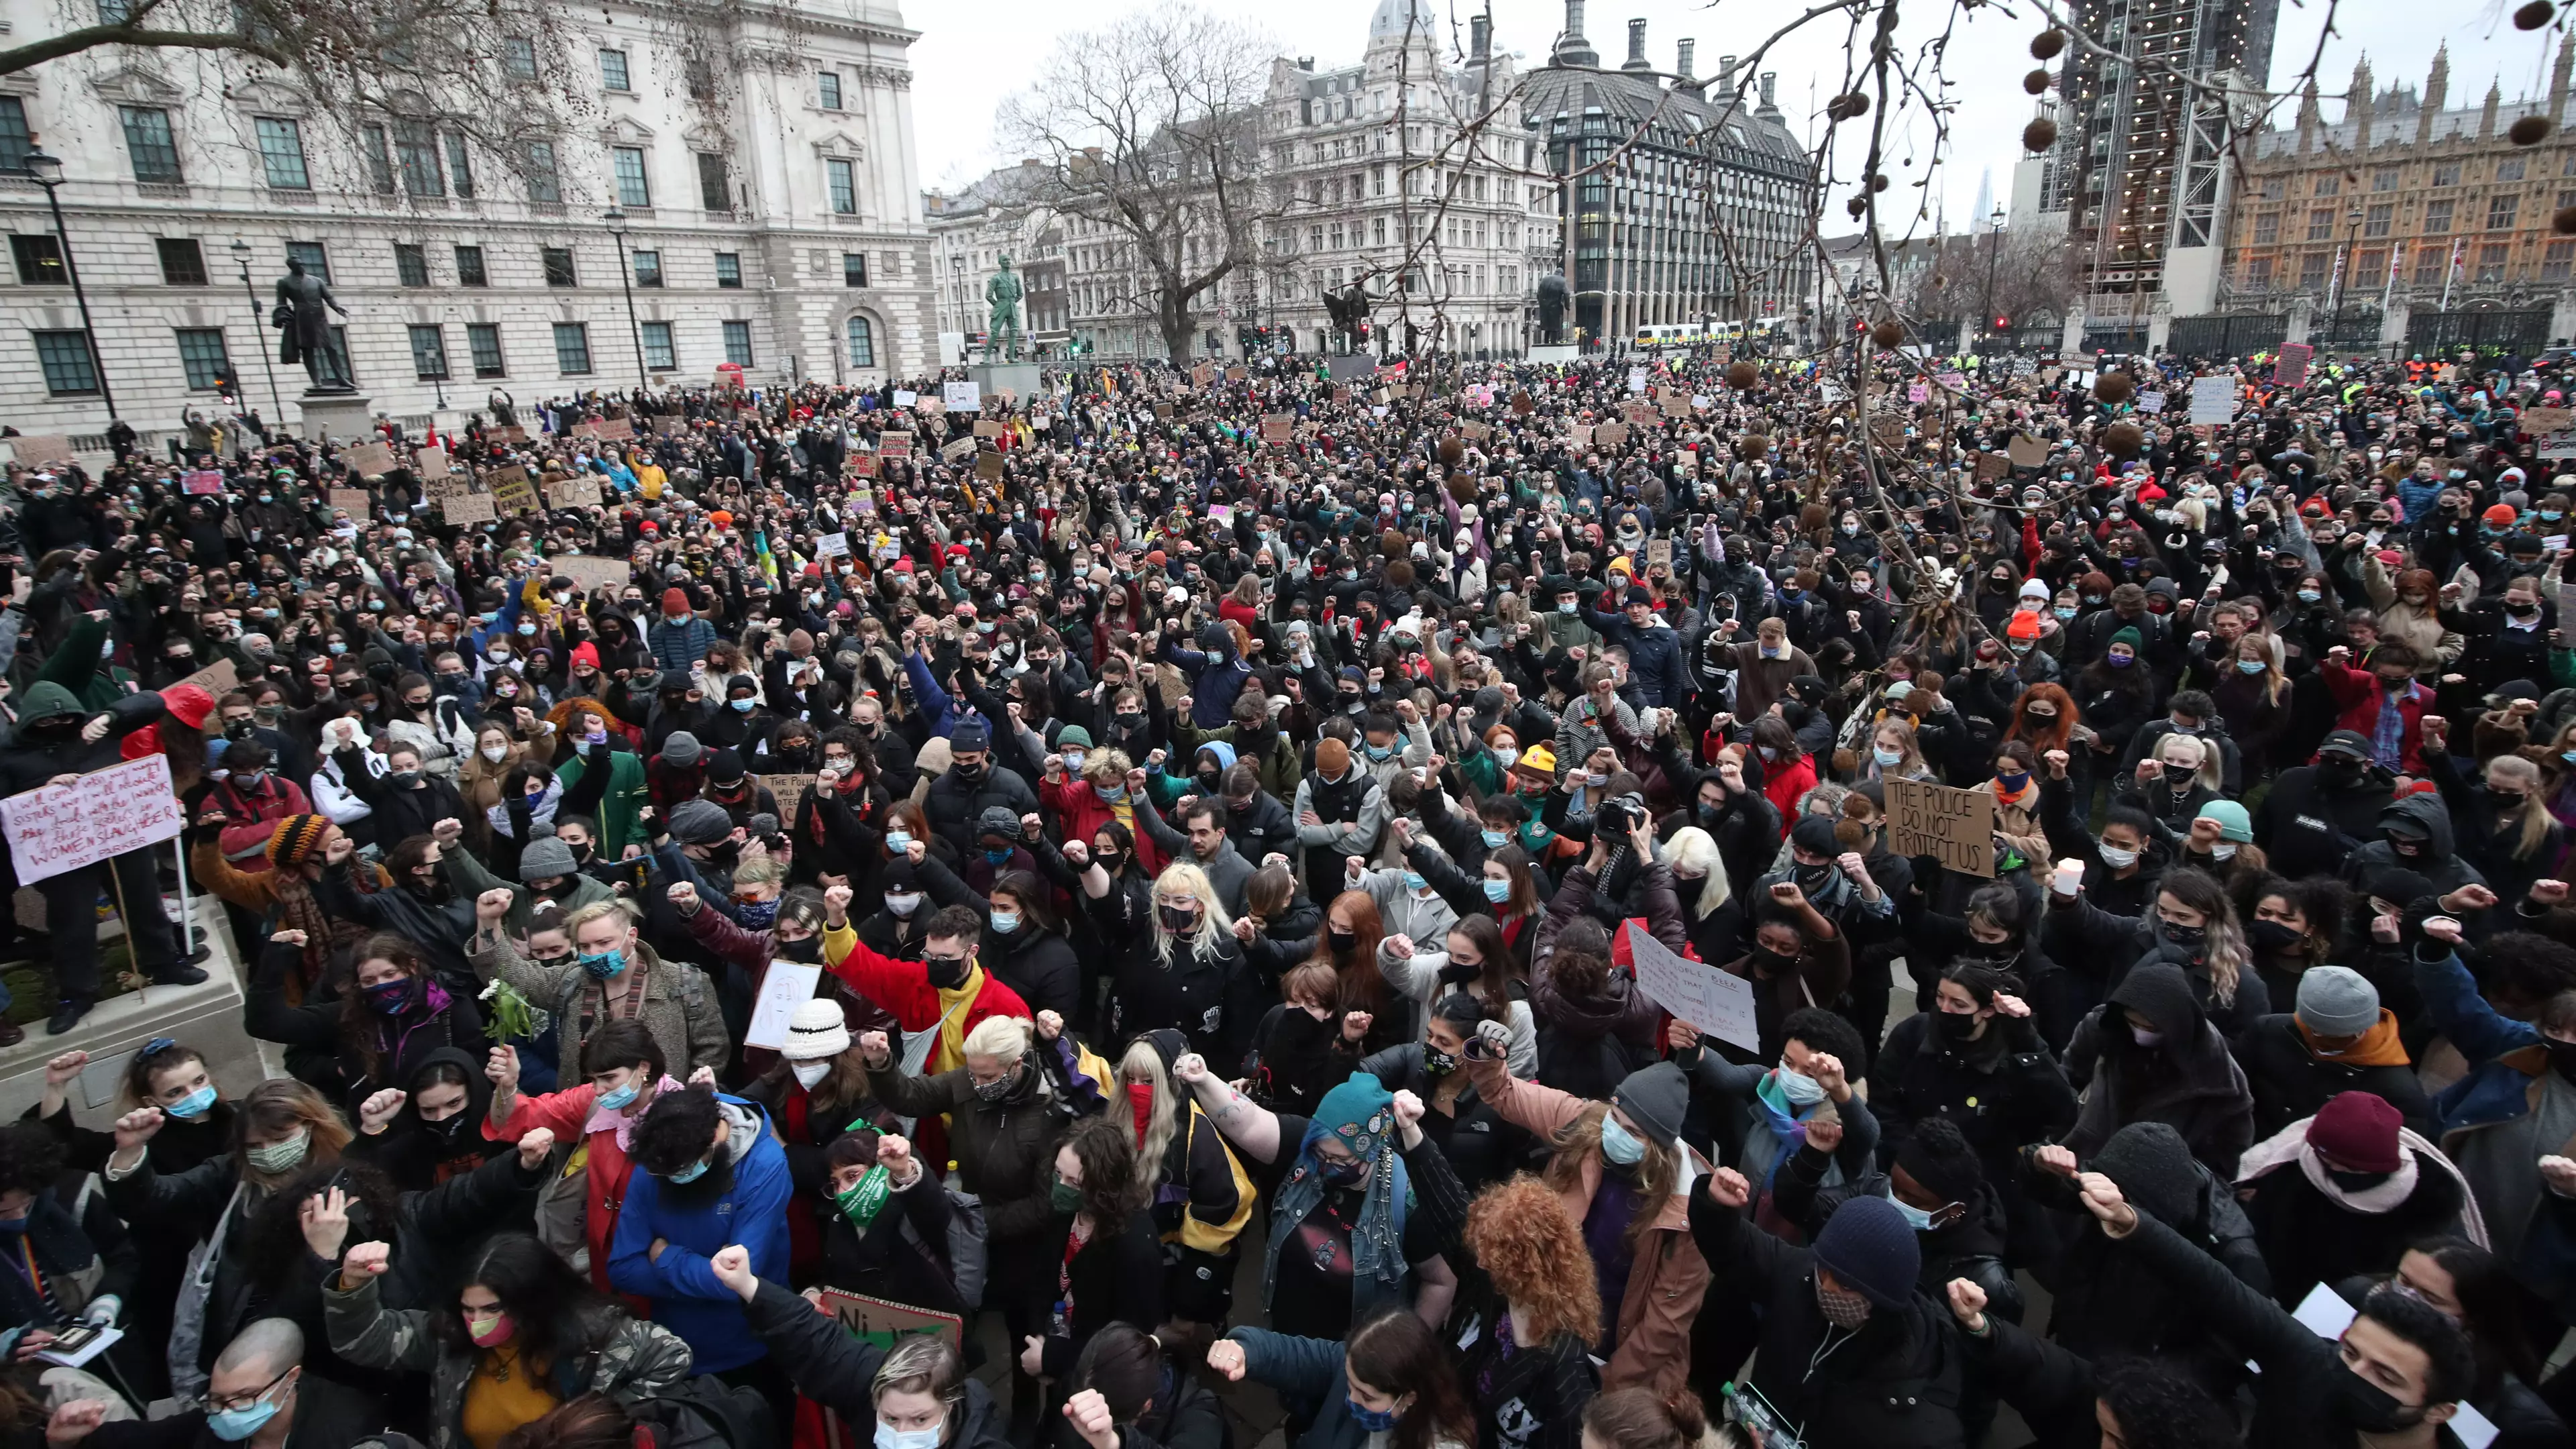 Thousands March On Parliament Square In Protest Over Police Handling Of Sarah Everard Vigil